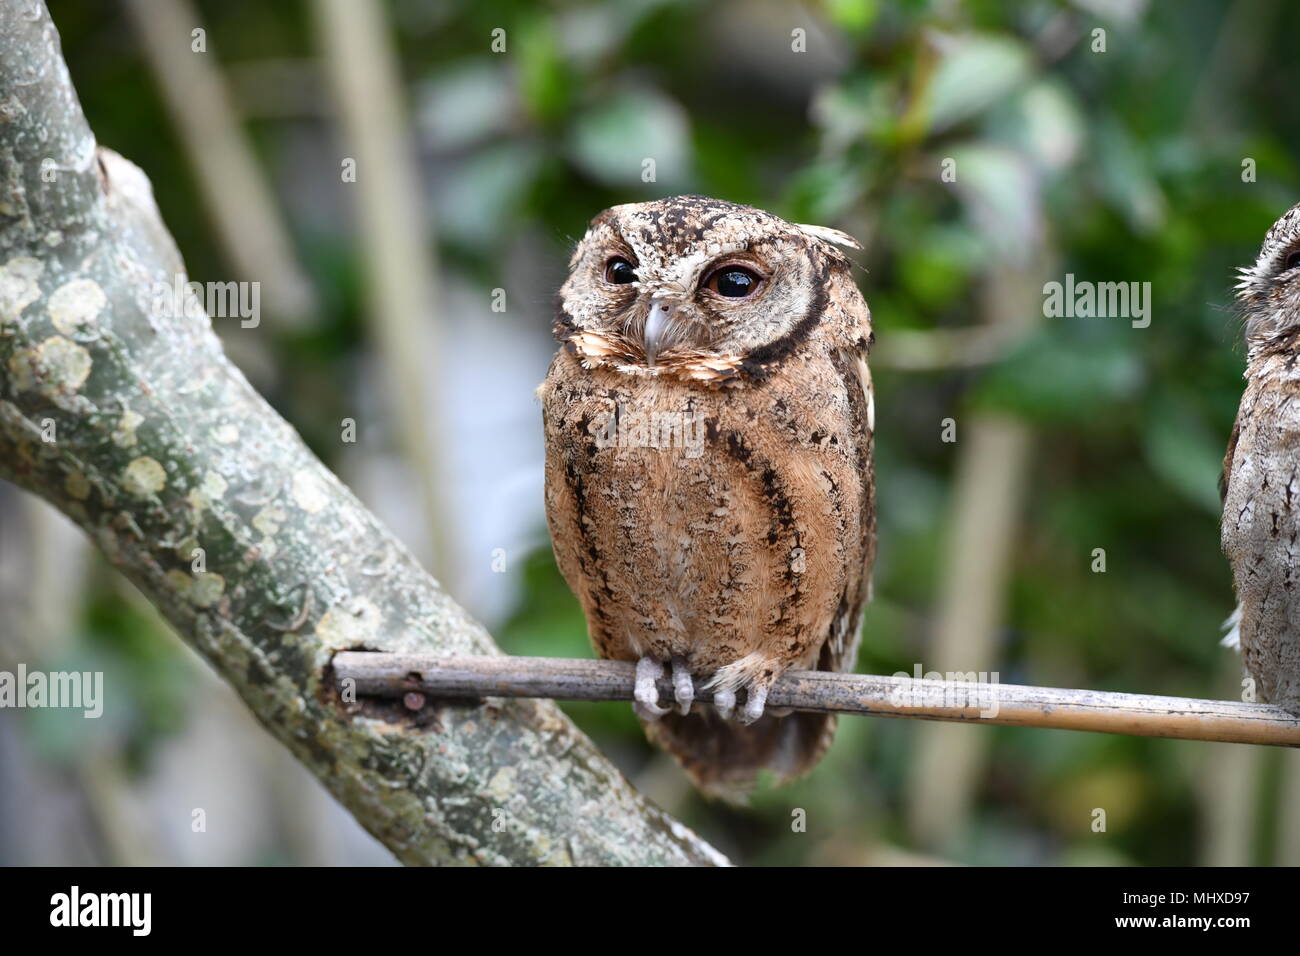 bali indonesia owl close up portrait looking at you Stock Photo